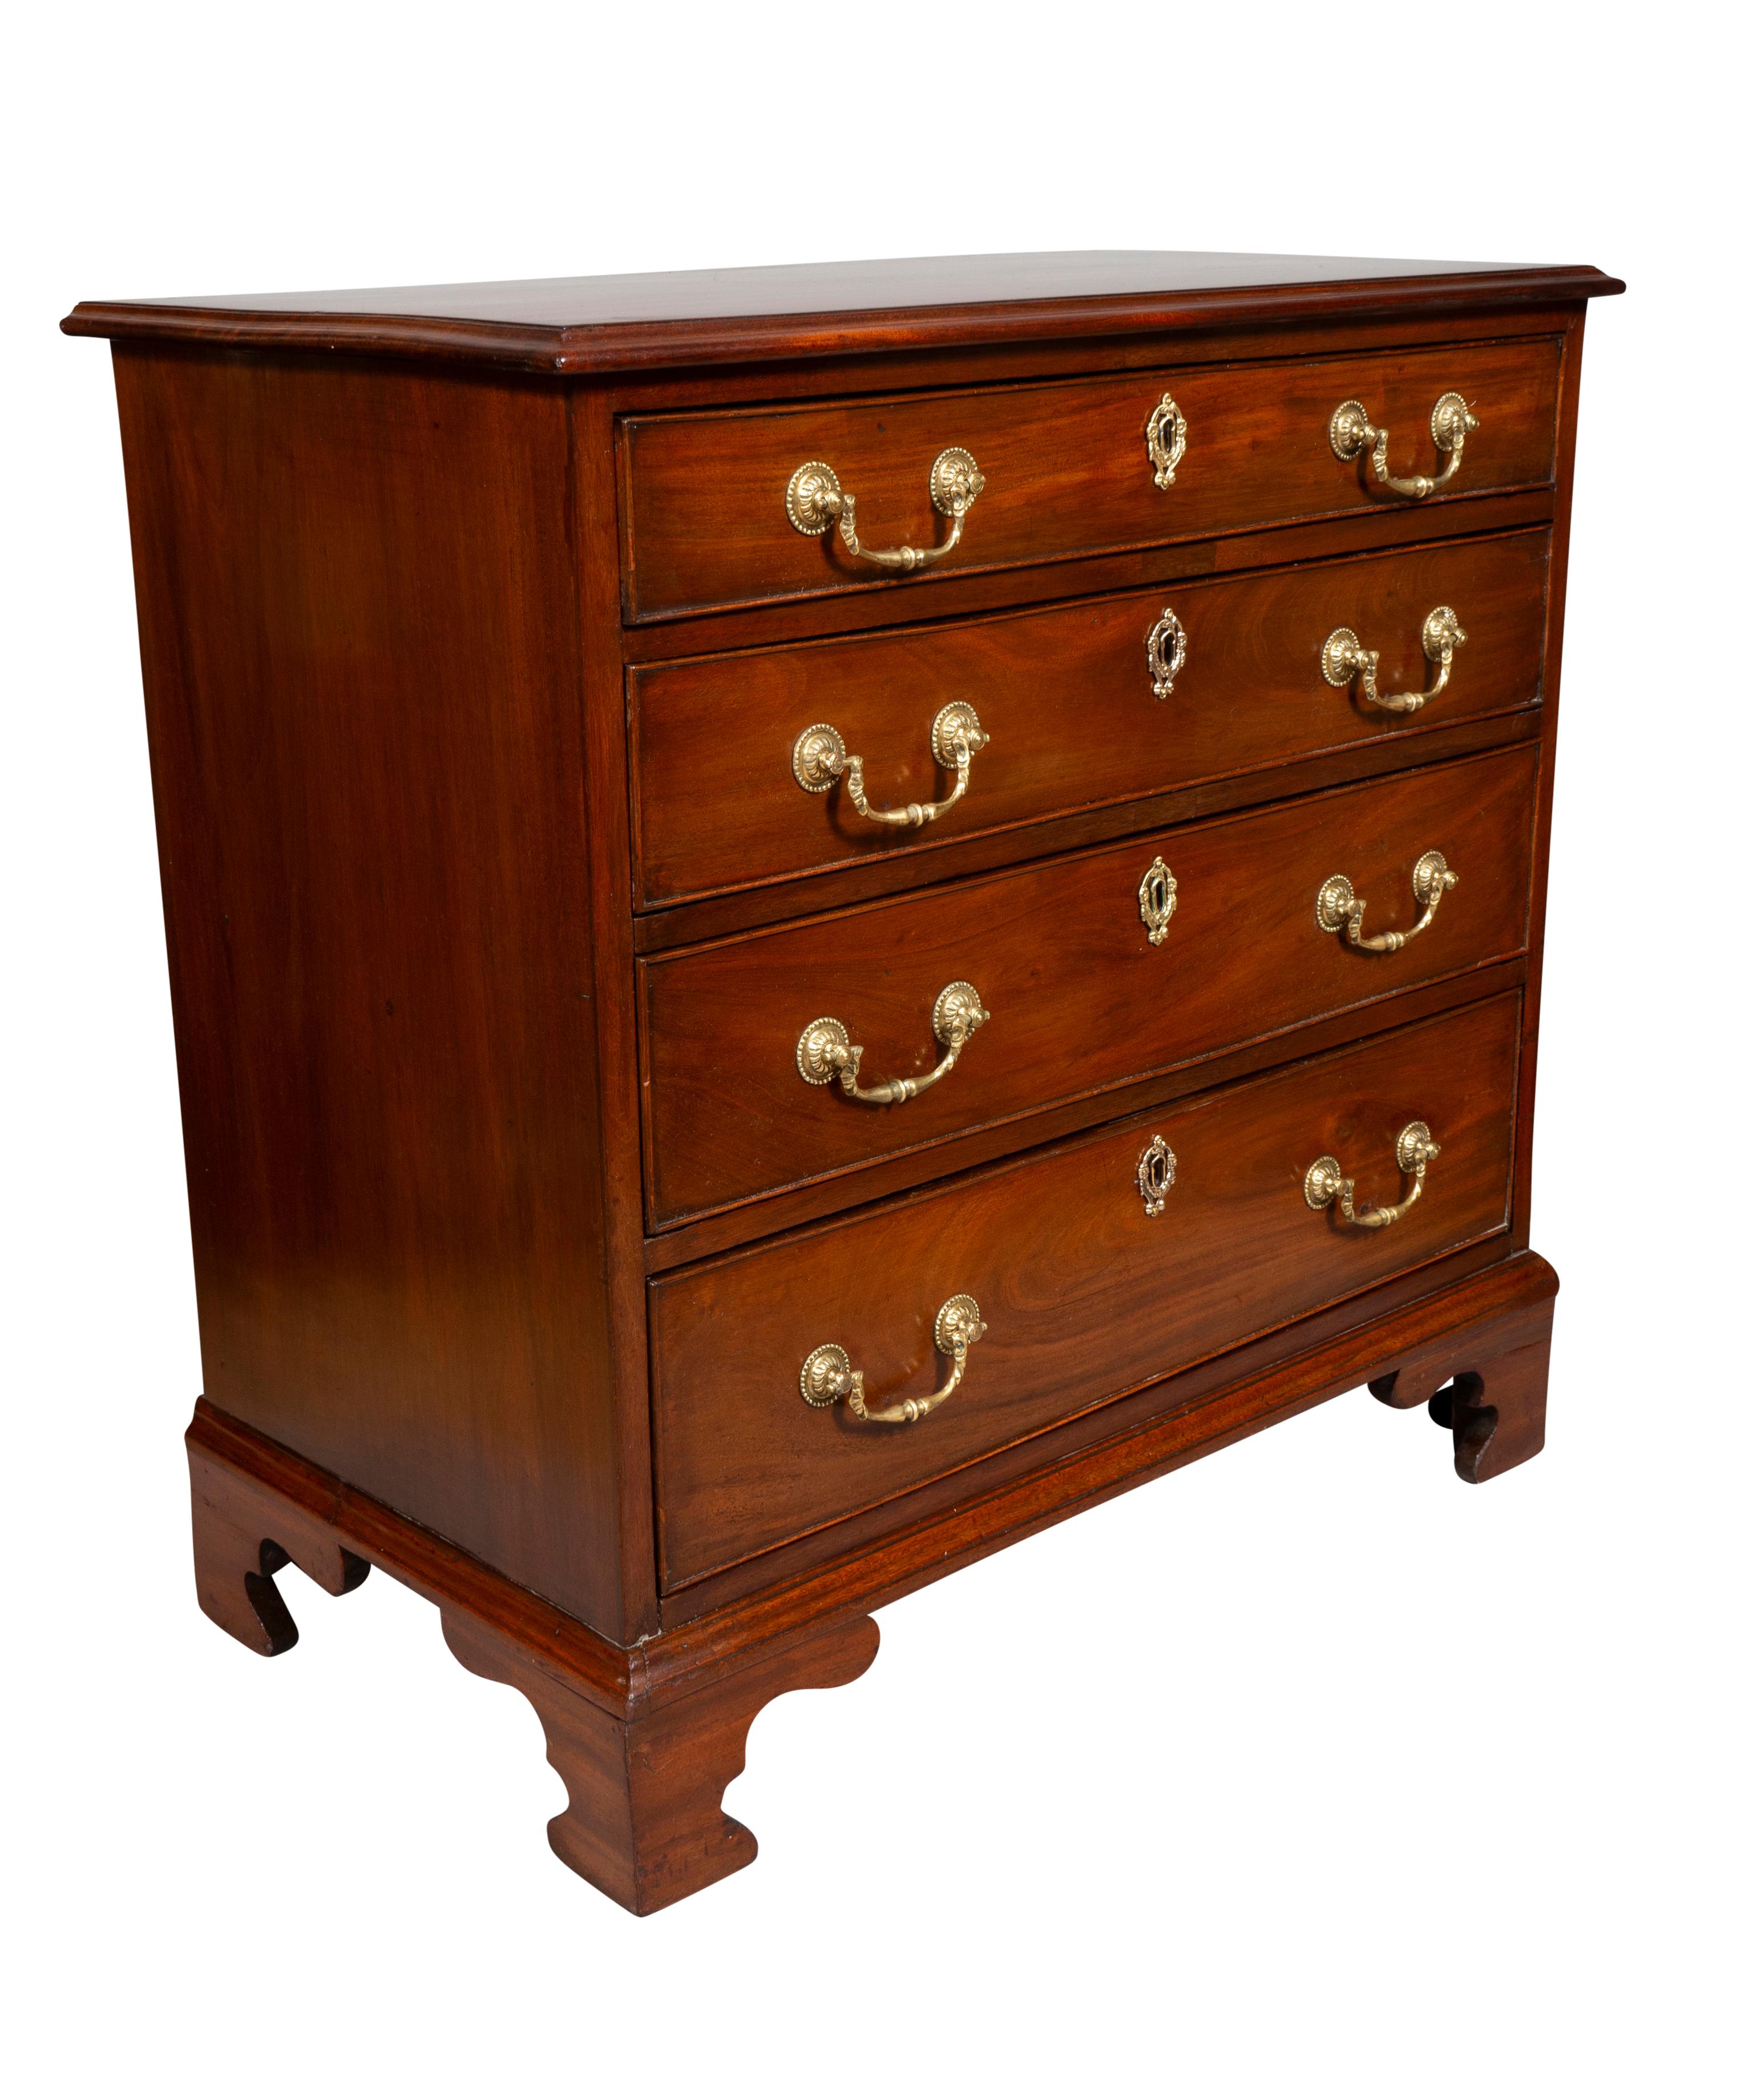 Rectangular top over four graduated drawers with bail handles.Bracket feet.